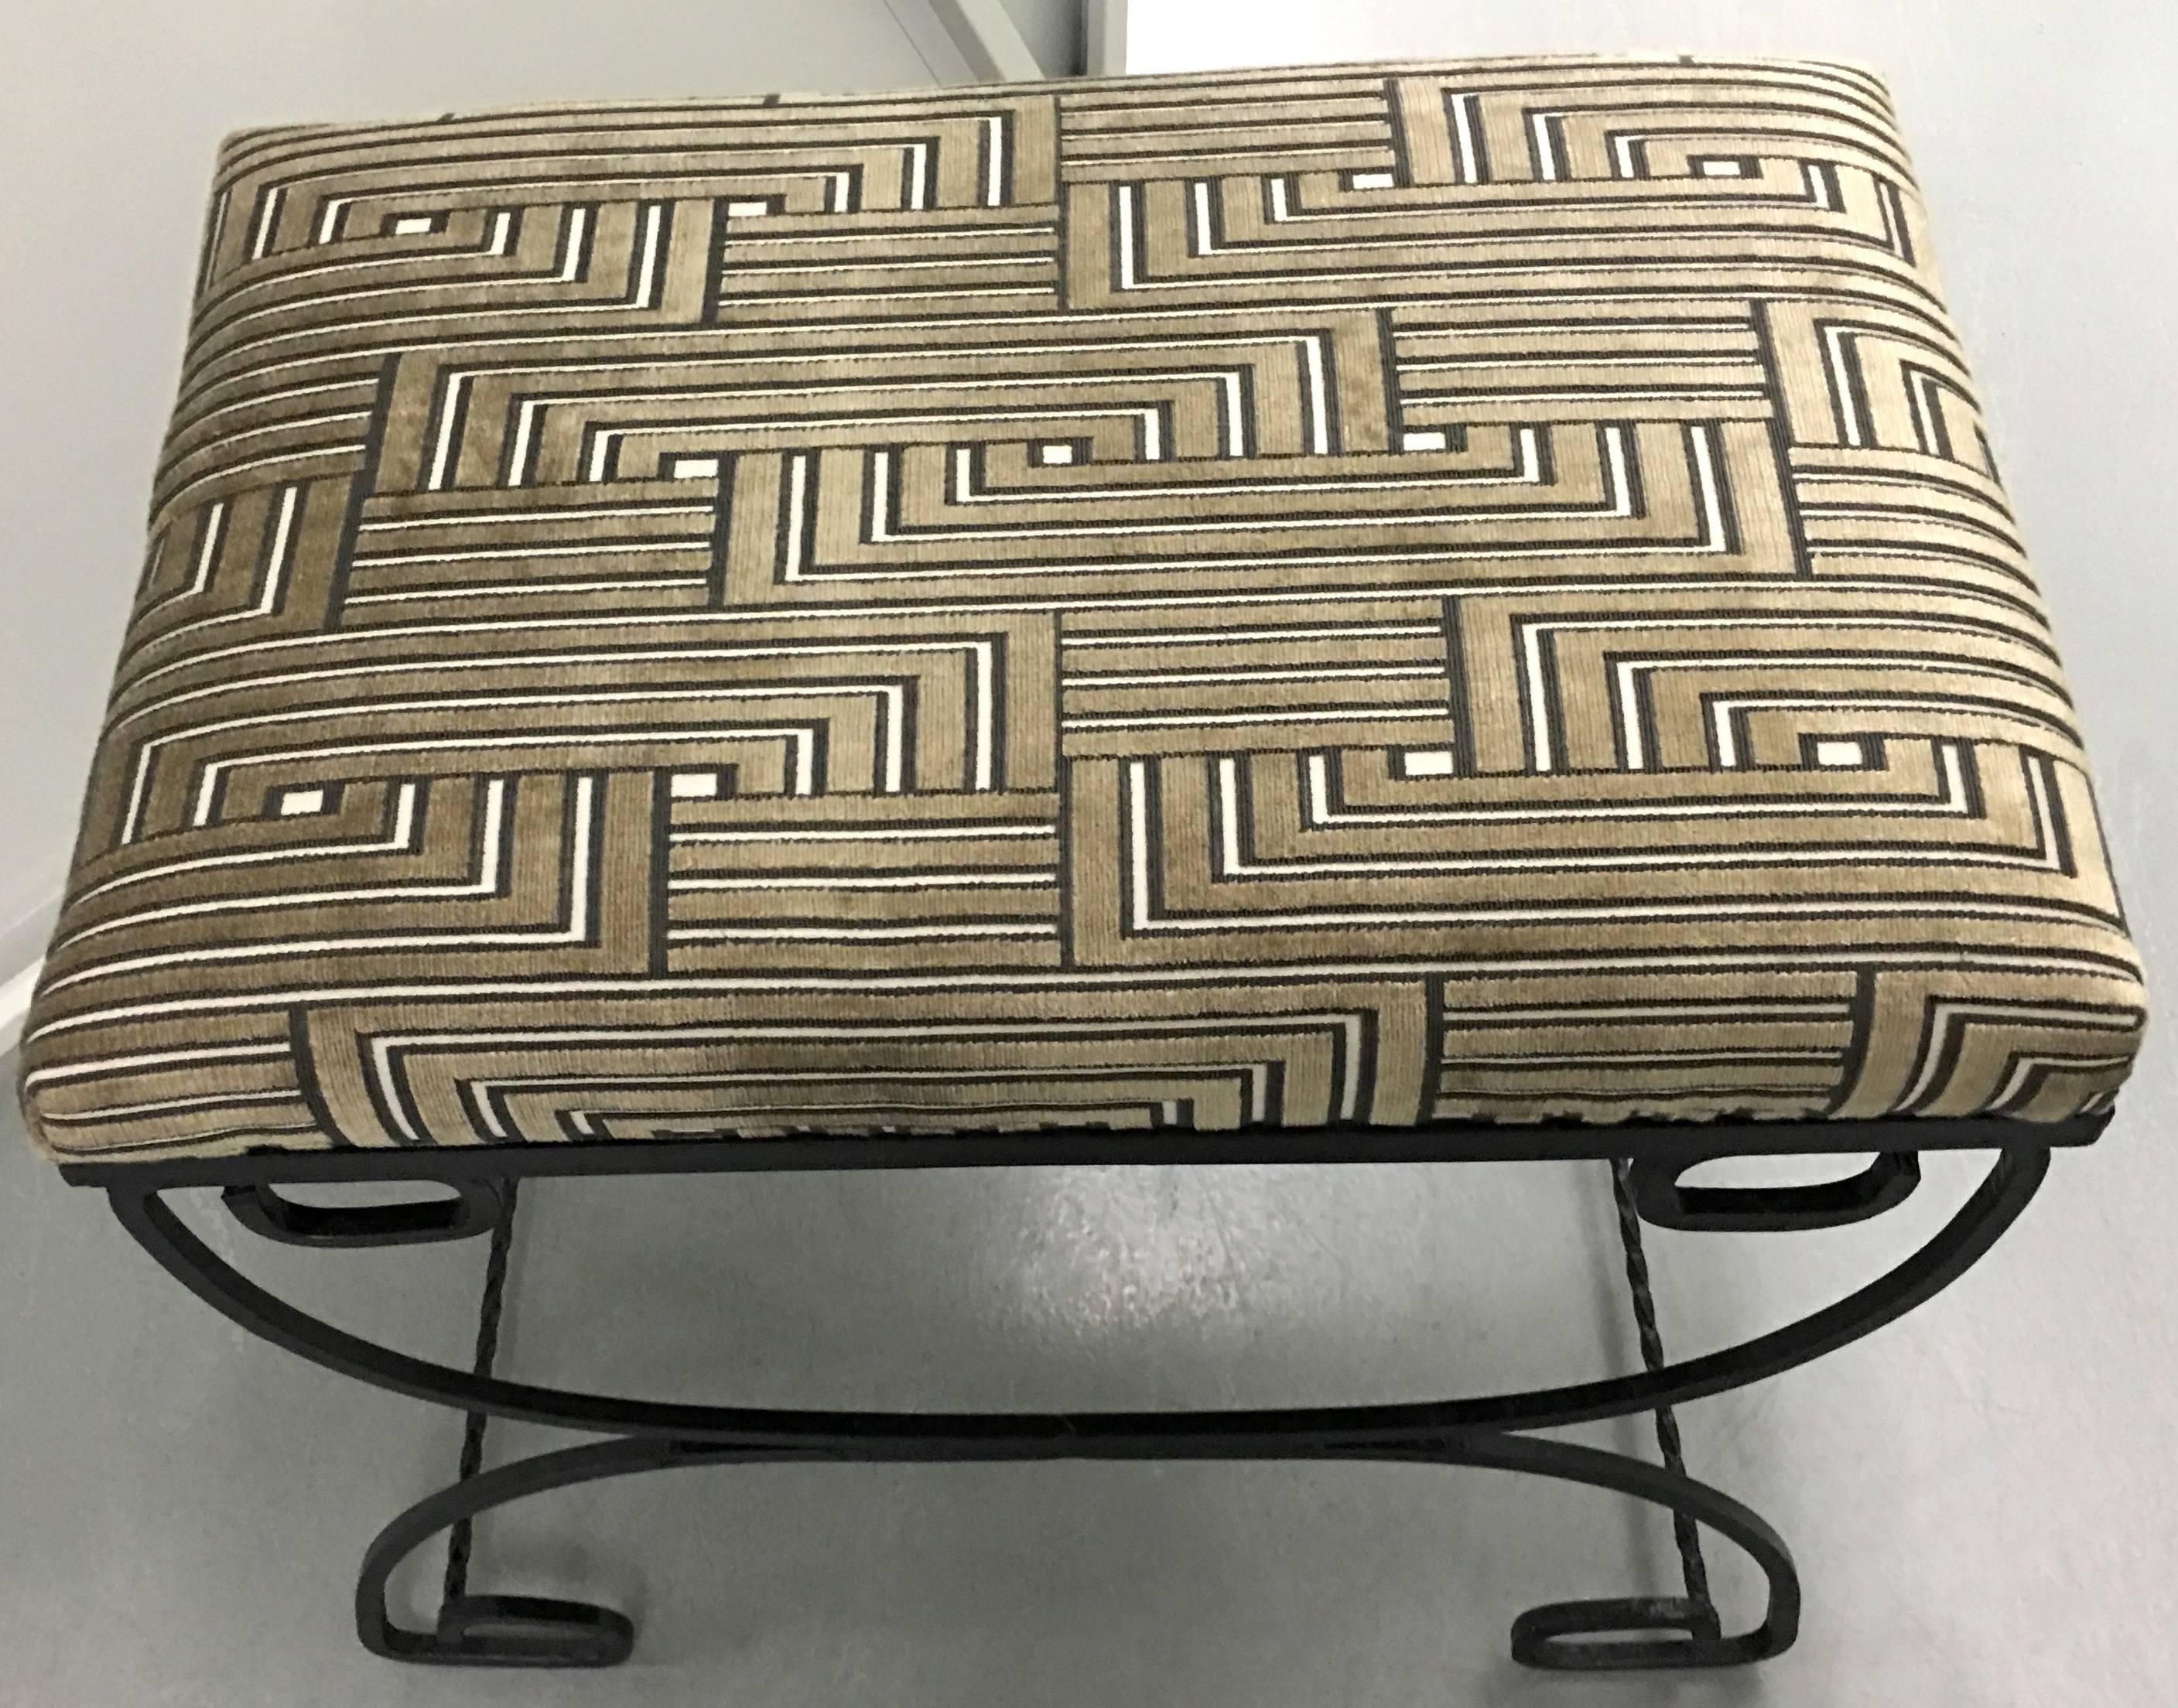 1950s Art Deco style bench. Black wrought iron with greek key detailing. Newly repainted in black satin finish. Newly upholstered in Lee Jofa Louvered Maze cut velvet.